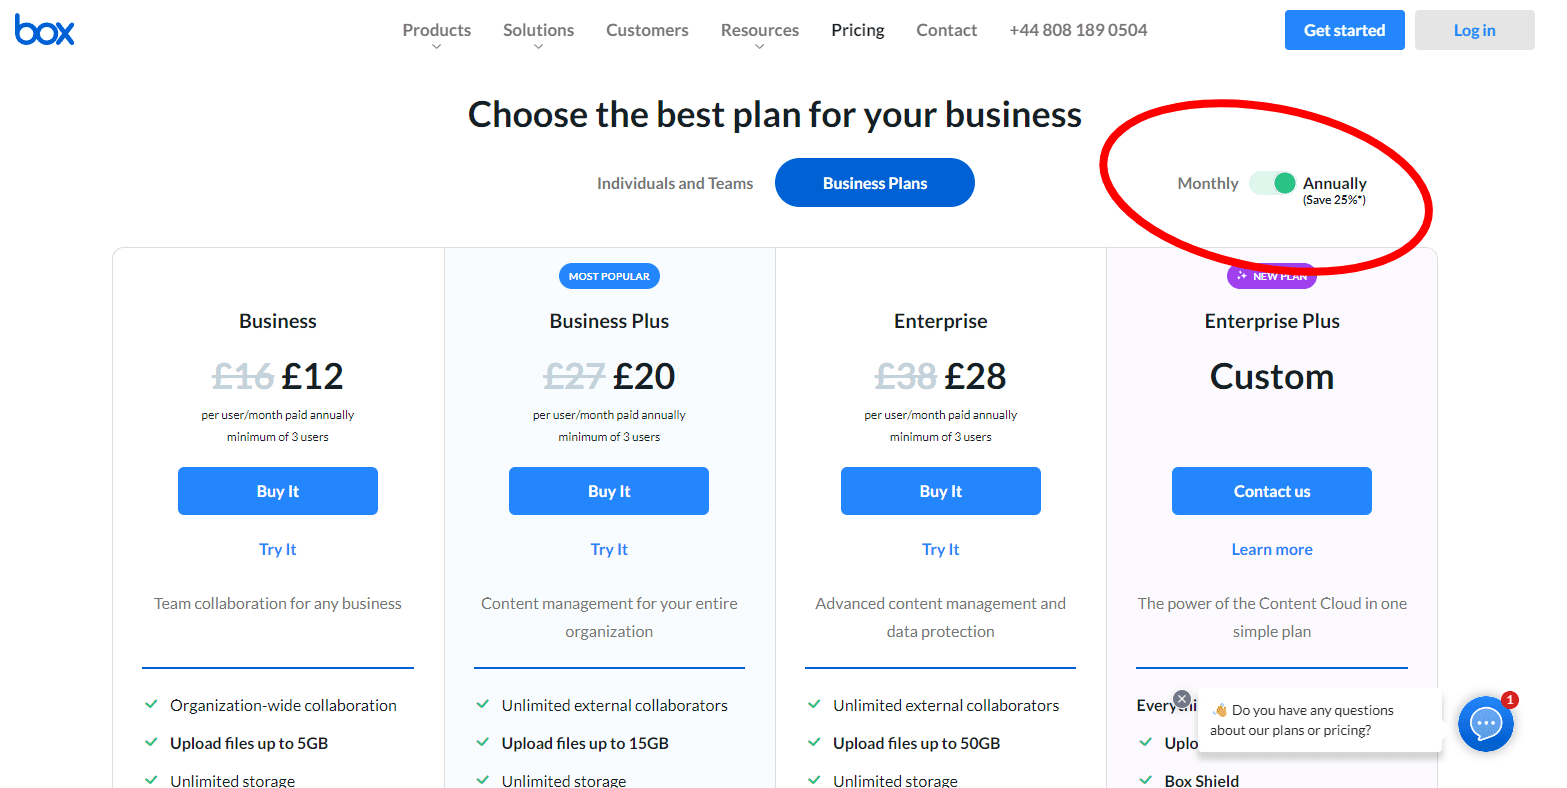 box.com pricing page showing all plans with the default setting set to annual price plans